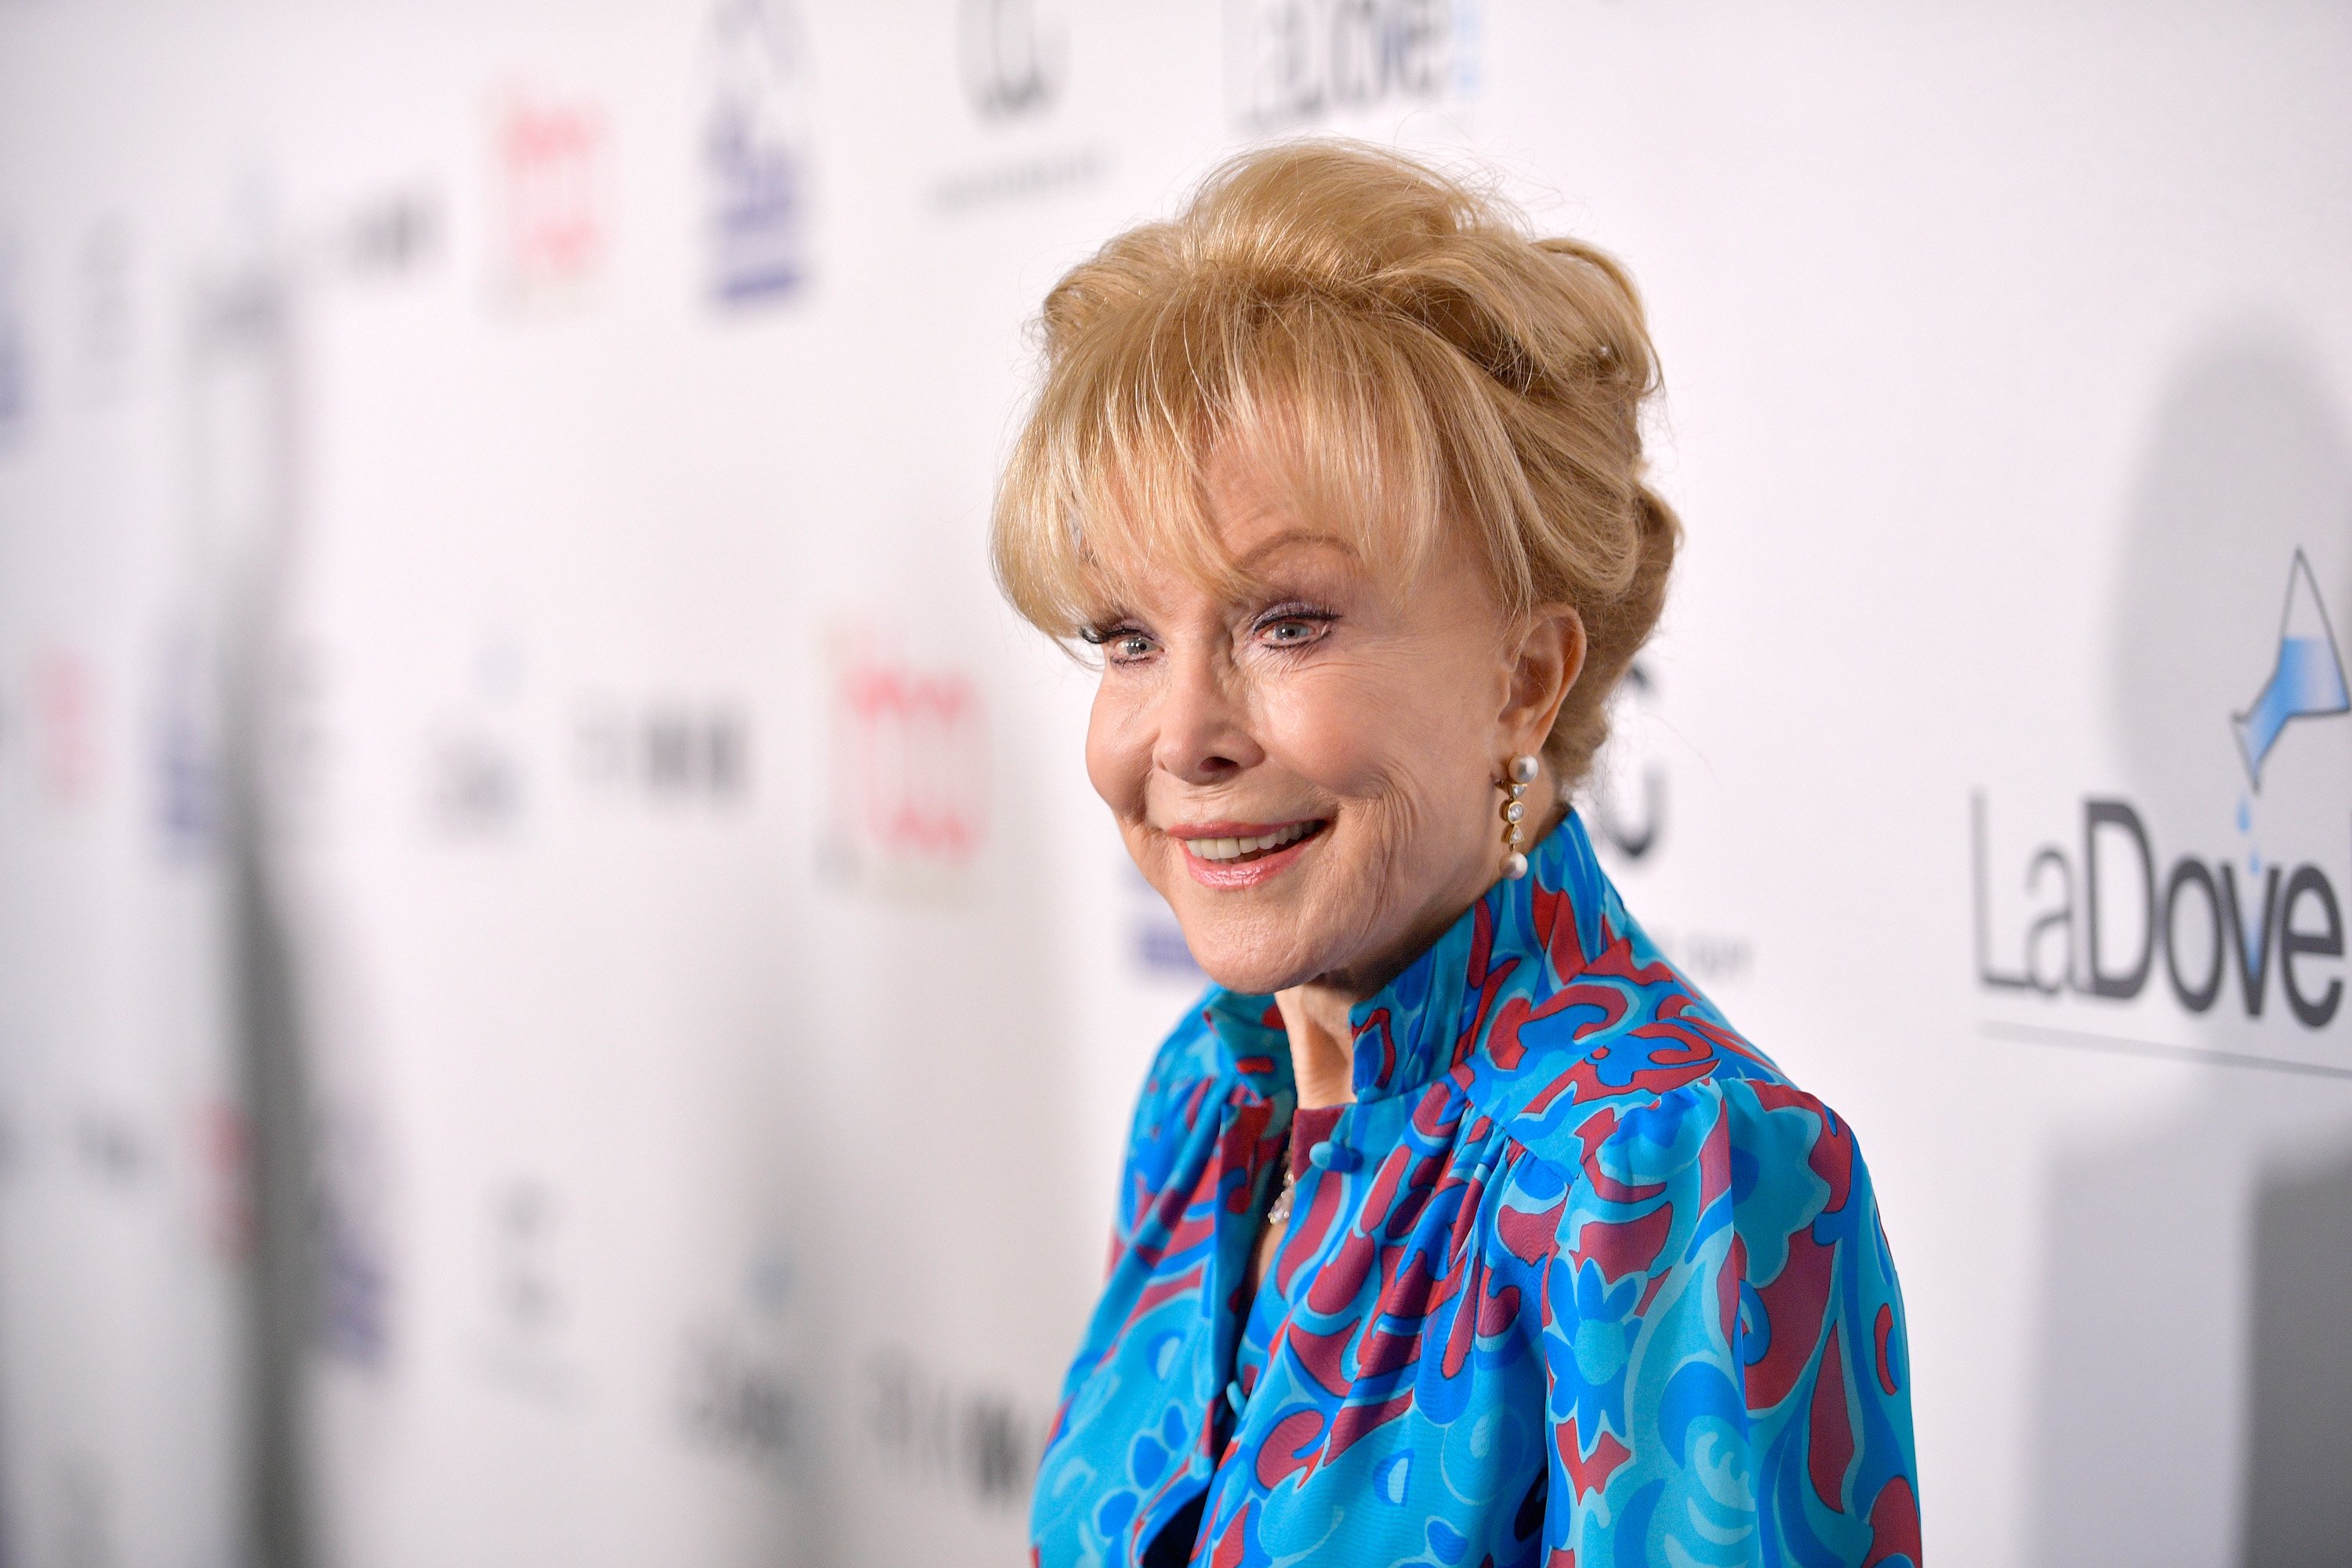 Barbara Eden attends the 4th Hollywood Beauty Awards in Los, Angeles, California on February 25, 2018 | Source: Getty Images